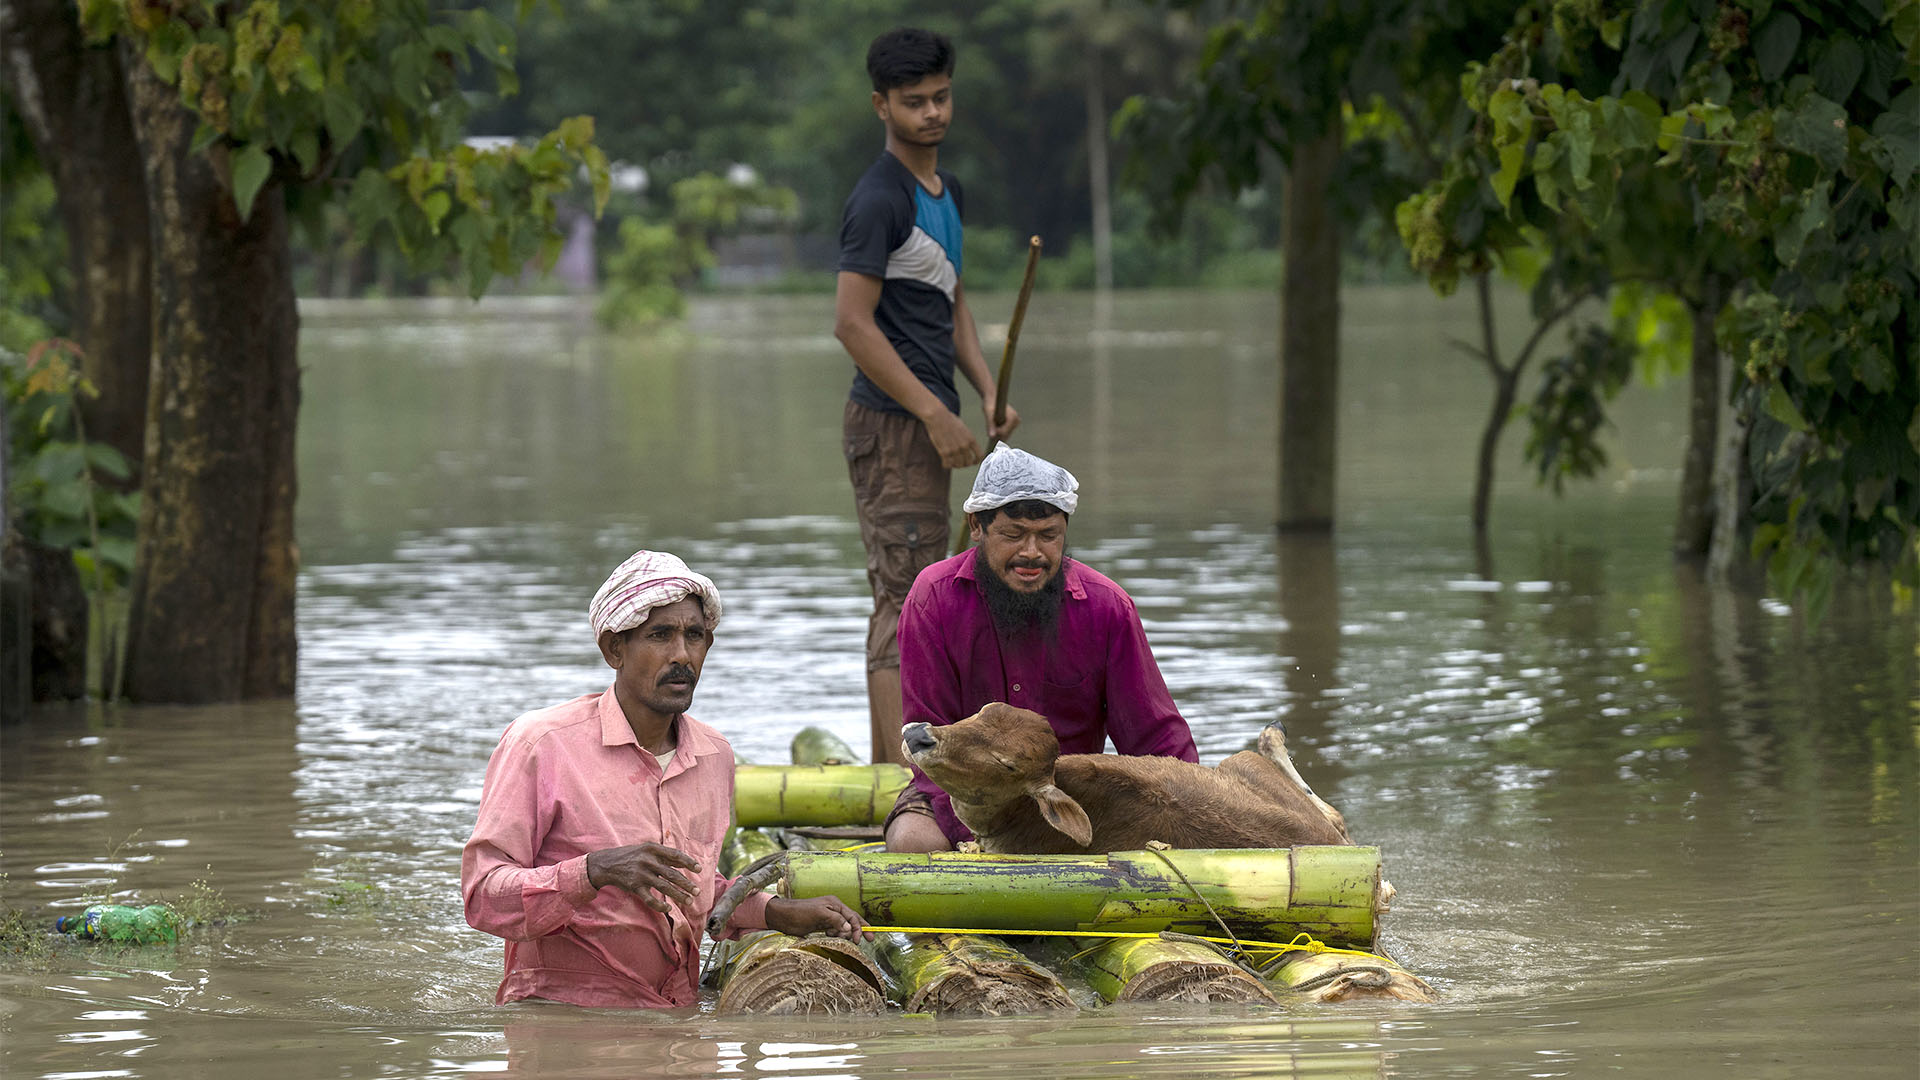 People in waist-deep water in India (AP Photo / Anupam Nath)